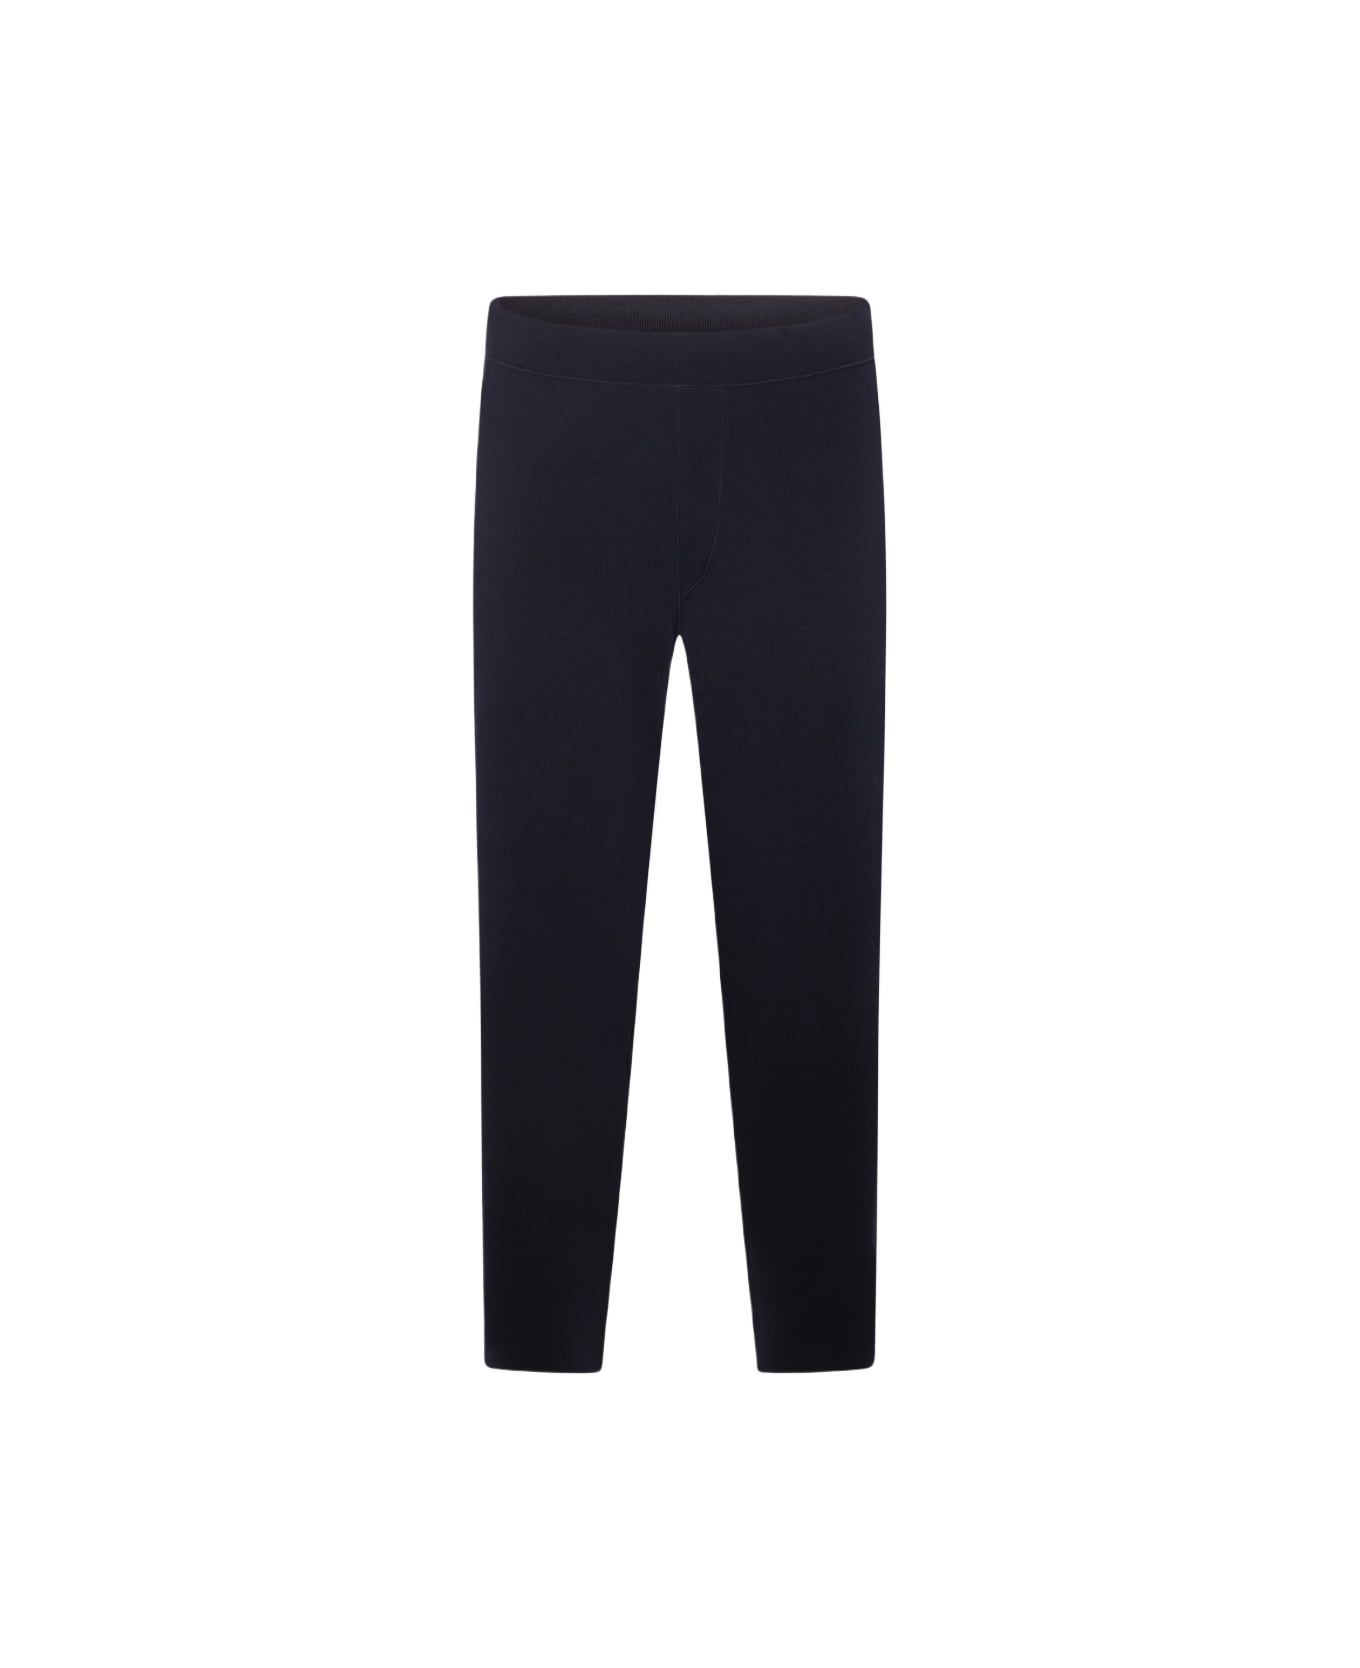 Brioni Navy Cotton Cashmere And Silk Blend Pants - Blue ボトムス